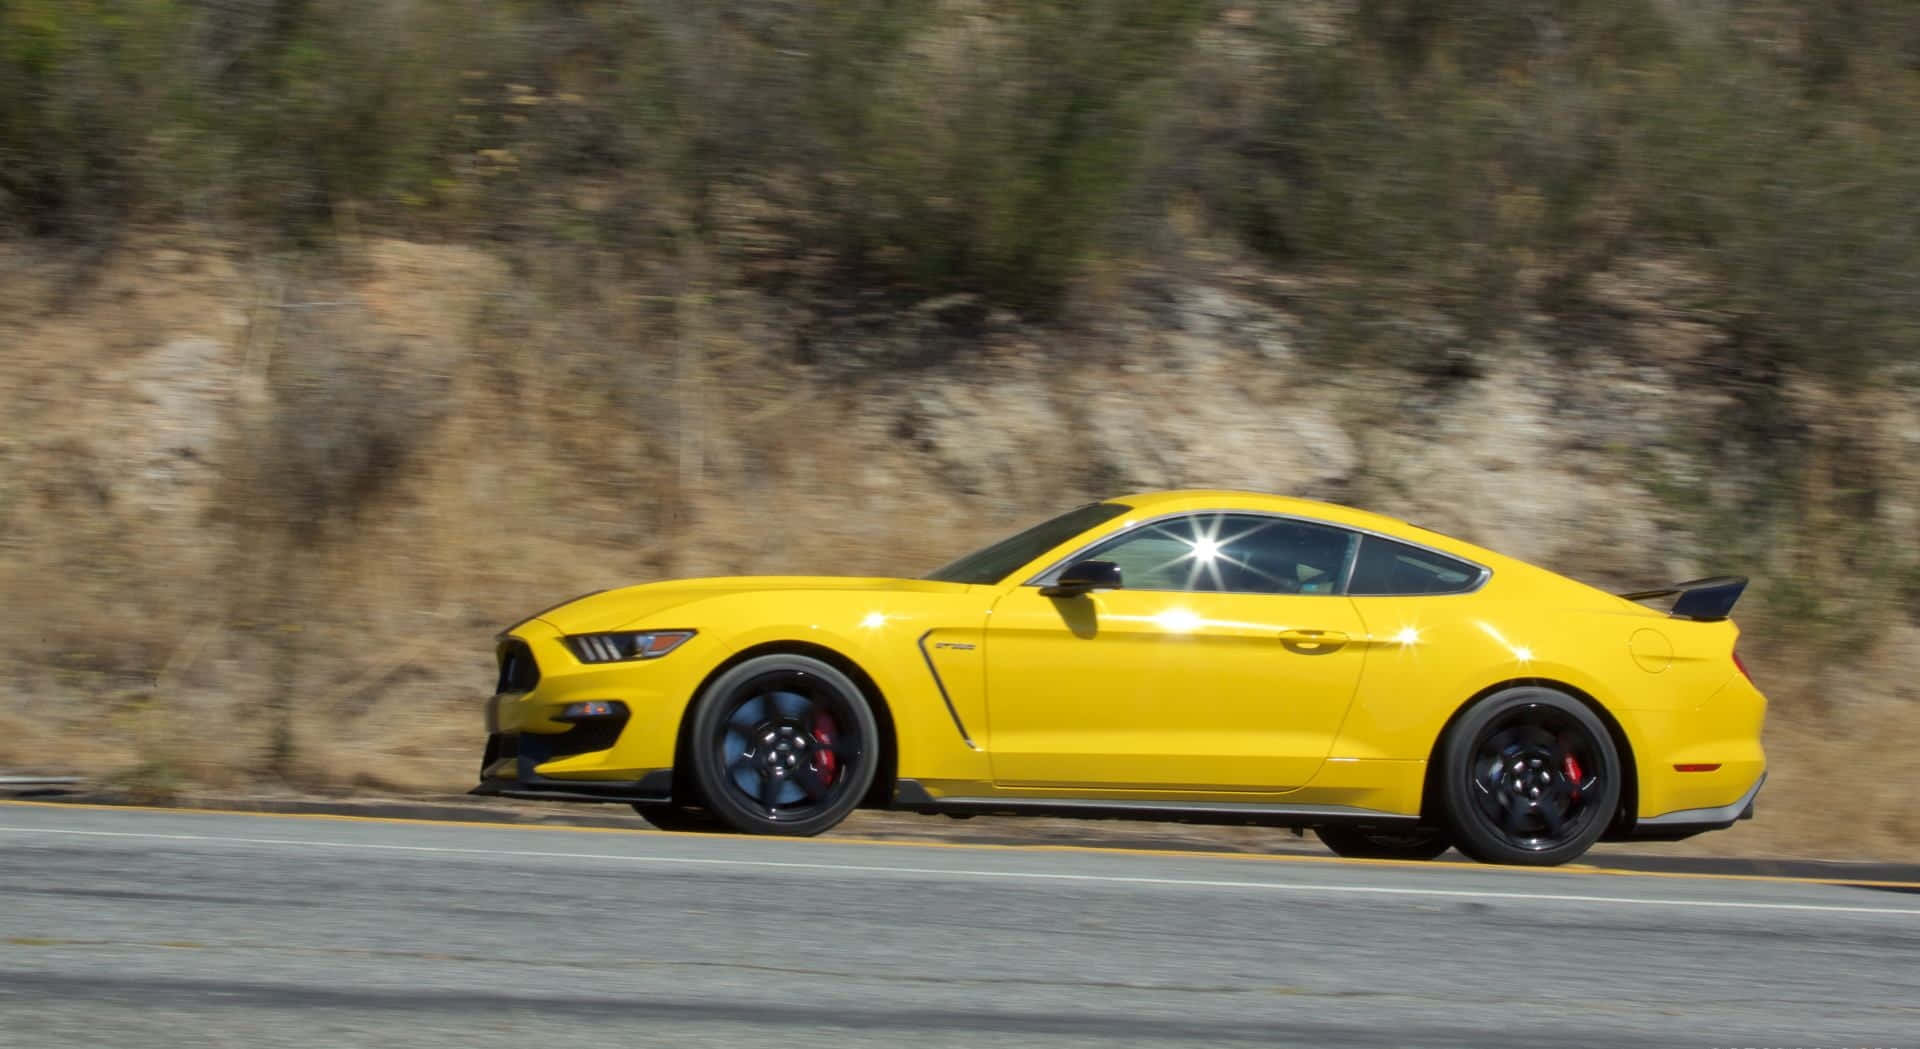 Stunning Ford Mustang Gt350r Roaring On The Road Wallpaper